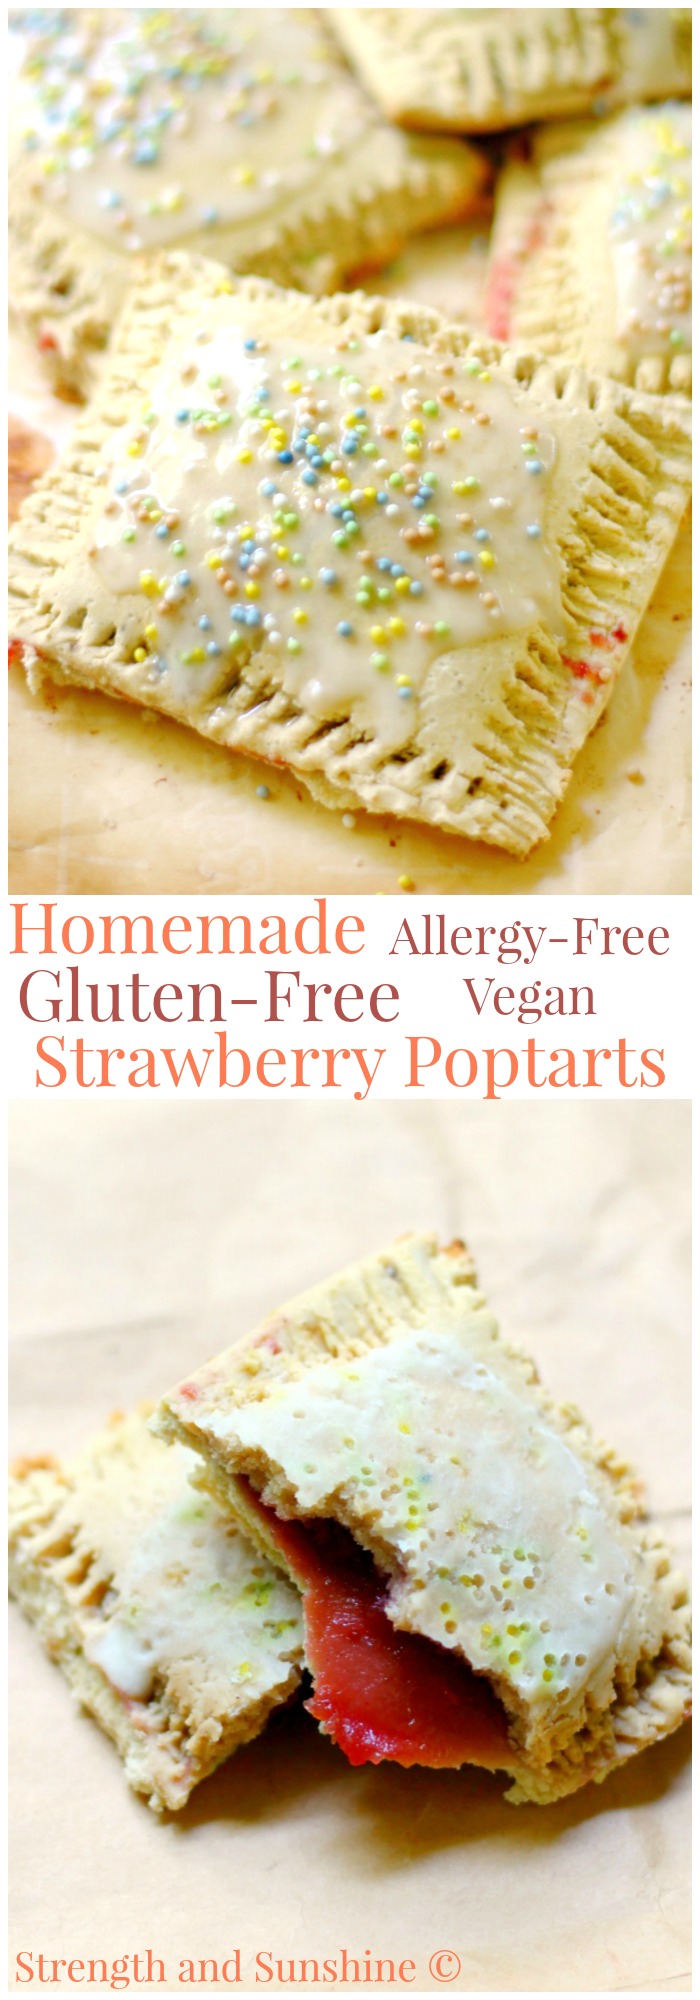 Homemade Gluten-Free Strawberry Poptarts (Allergy-Free, Vegan) | Strength and Sunshine @RebeccaGF666 Who wouldn't want a healthier but equally delicious version of this breakfast and snack time classic? Homemade Gluten-Free Strawberry Poptarts! Allergy-free and vegan without the processed sugars and fats! A recipe that's fun to make and of course, EAT!